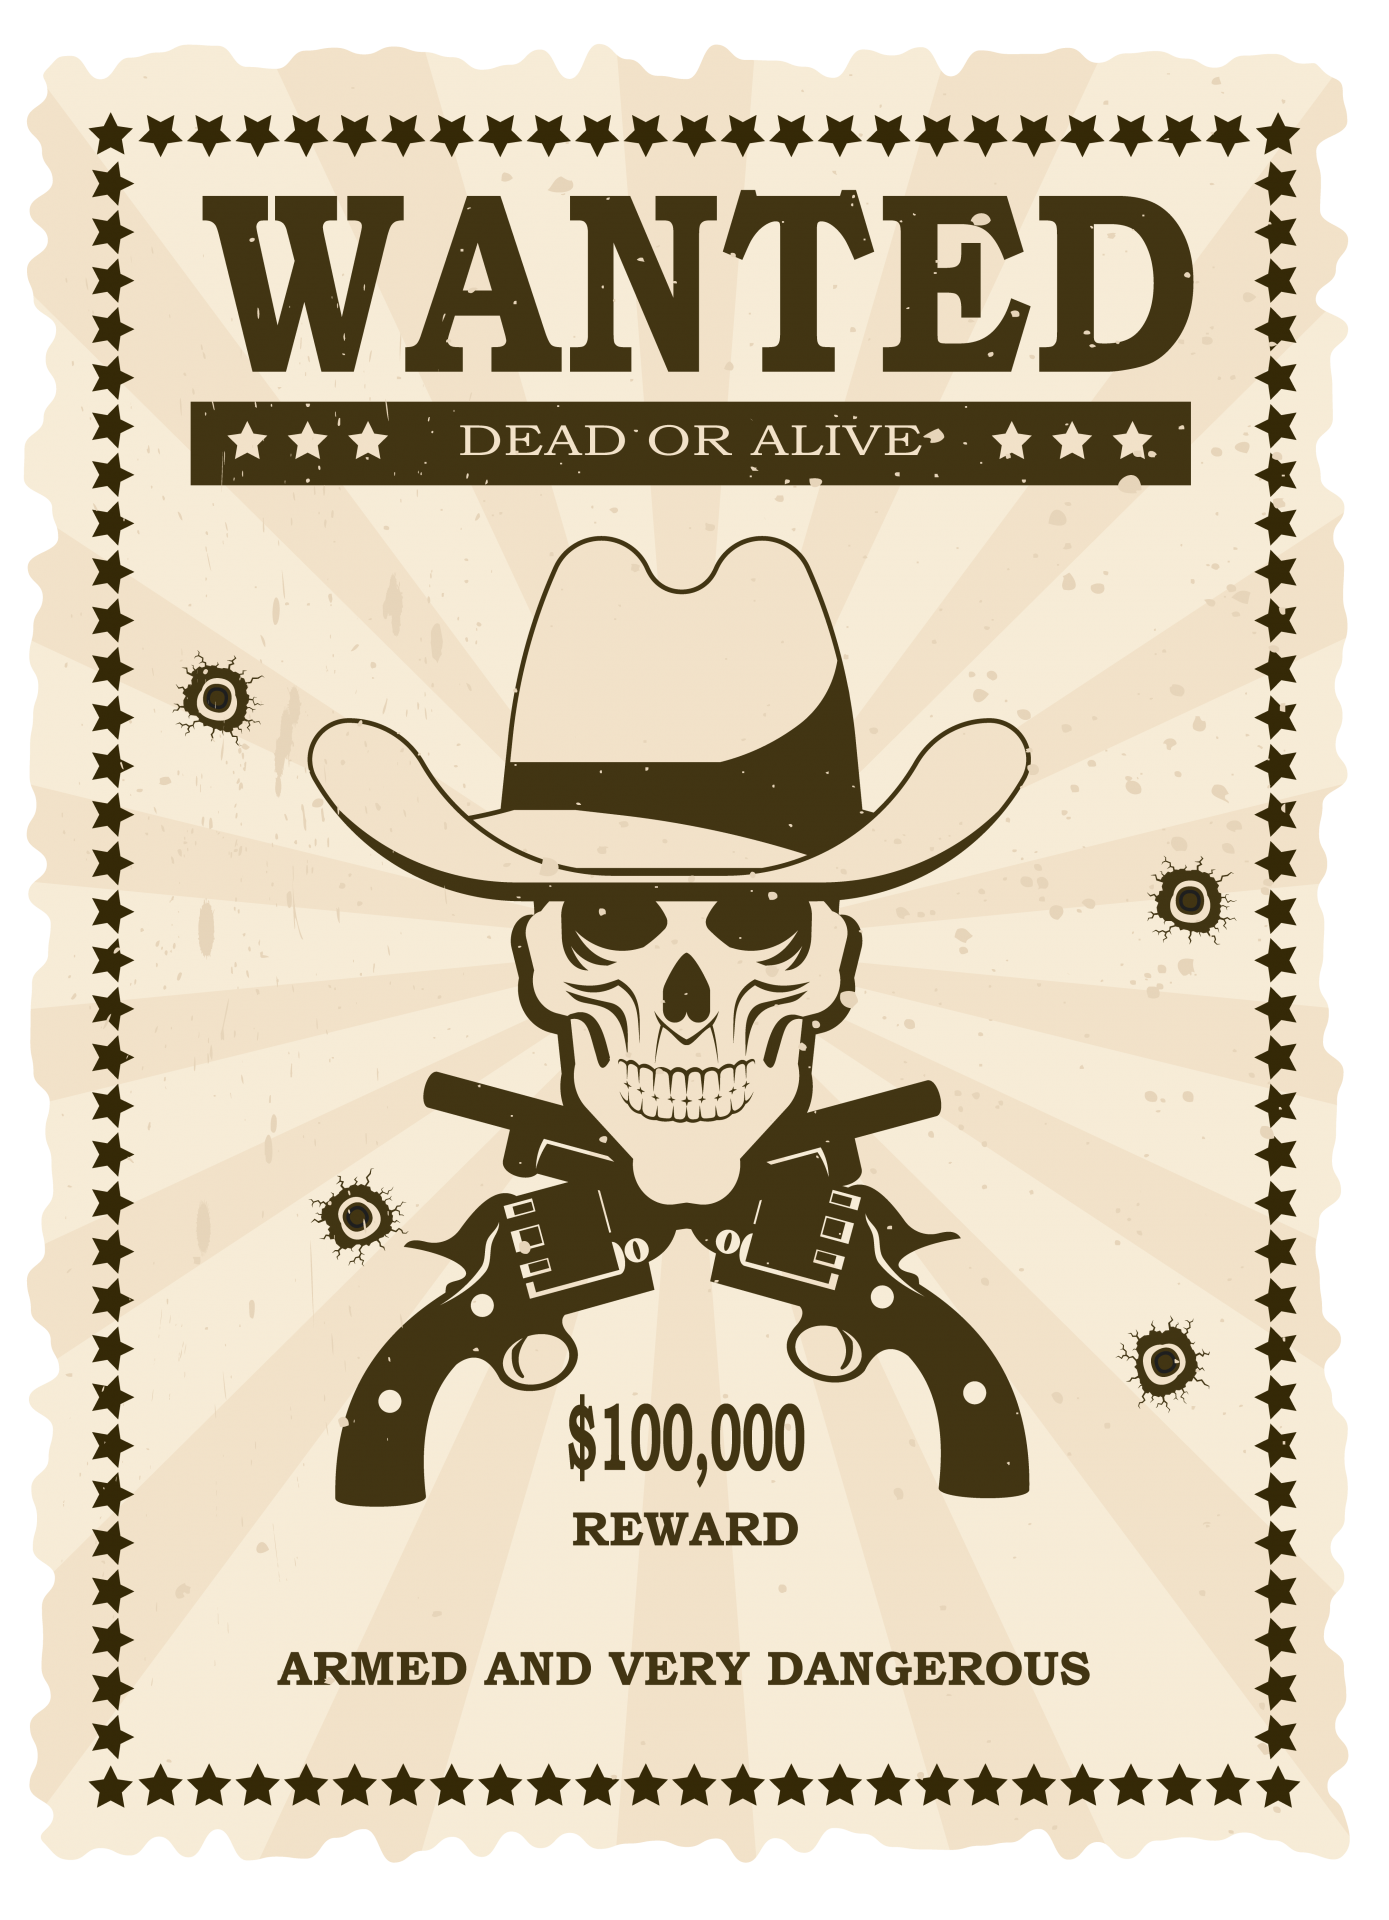 Wanted Vintage Cowboy Poster